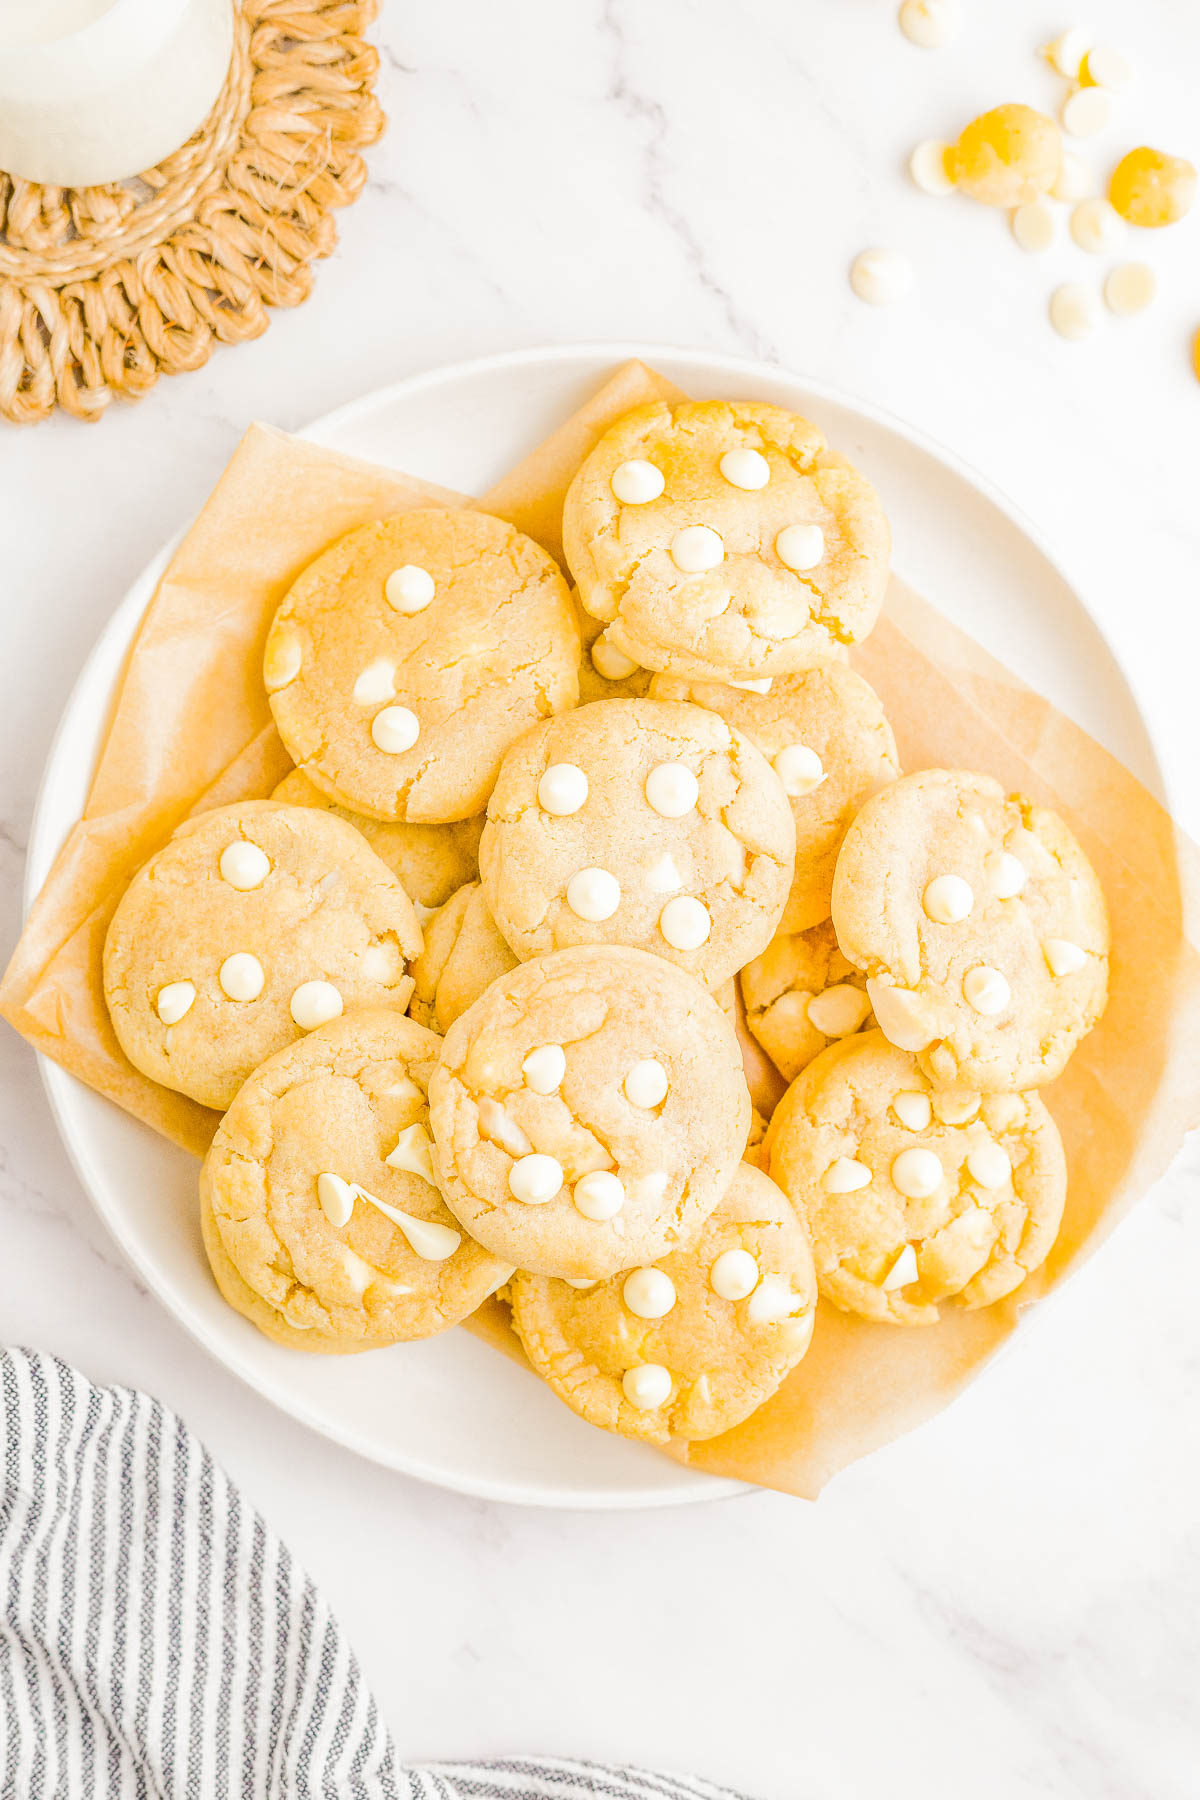 White Chocolate Macadamia Nut Cookies - These EASY white chocolate and macadamia nut cookies are the perfect combination of sweet, nutty, soft and chewy perfection! They're loaded with creamy white chocolate chips and crispy chunks of macadamia nuts and baked until slightly crisp on the outside with a perfectly soft and slightly chewy center. Learn how to make these cookies that are BETTER than from a bakery! 